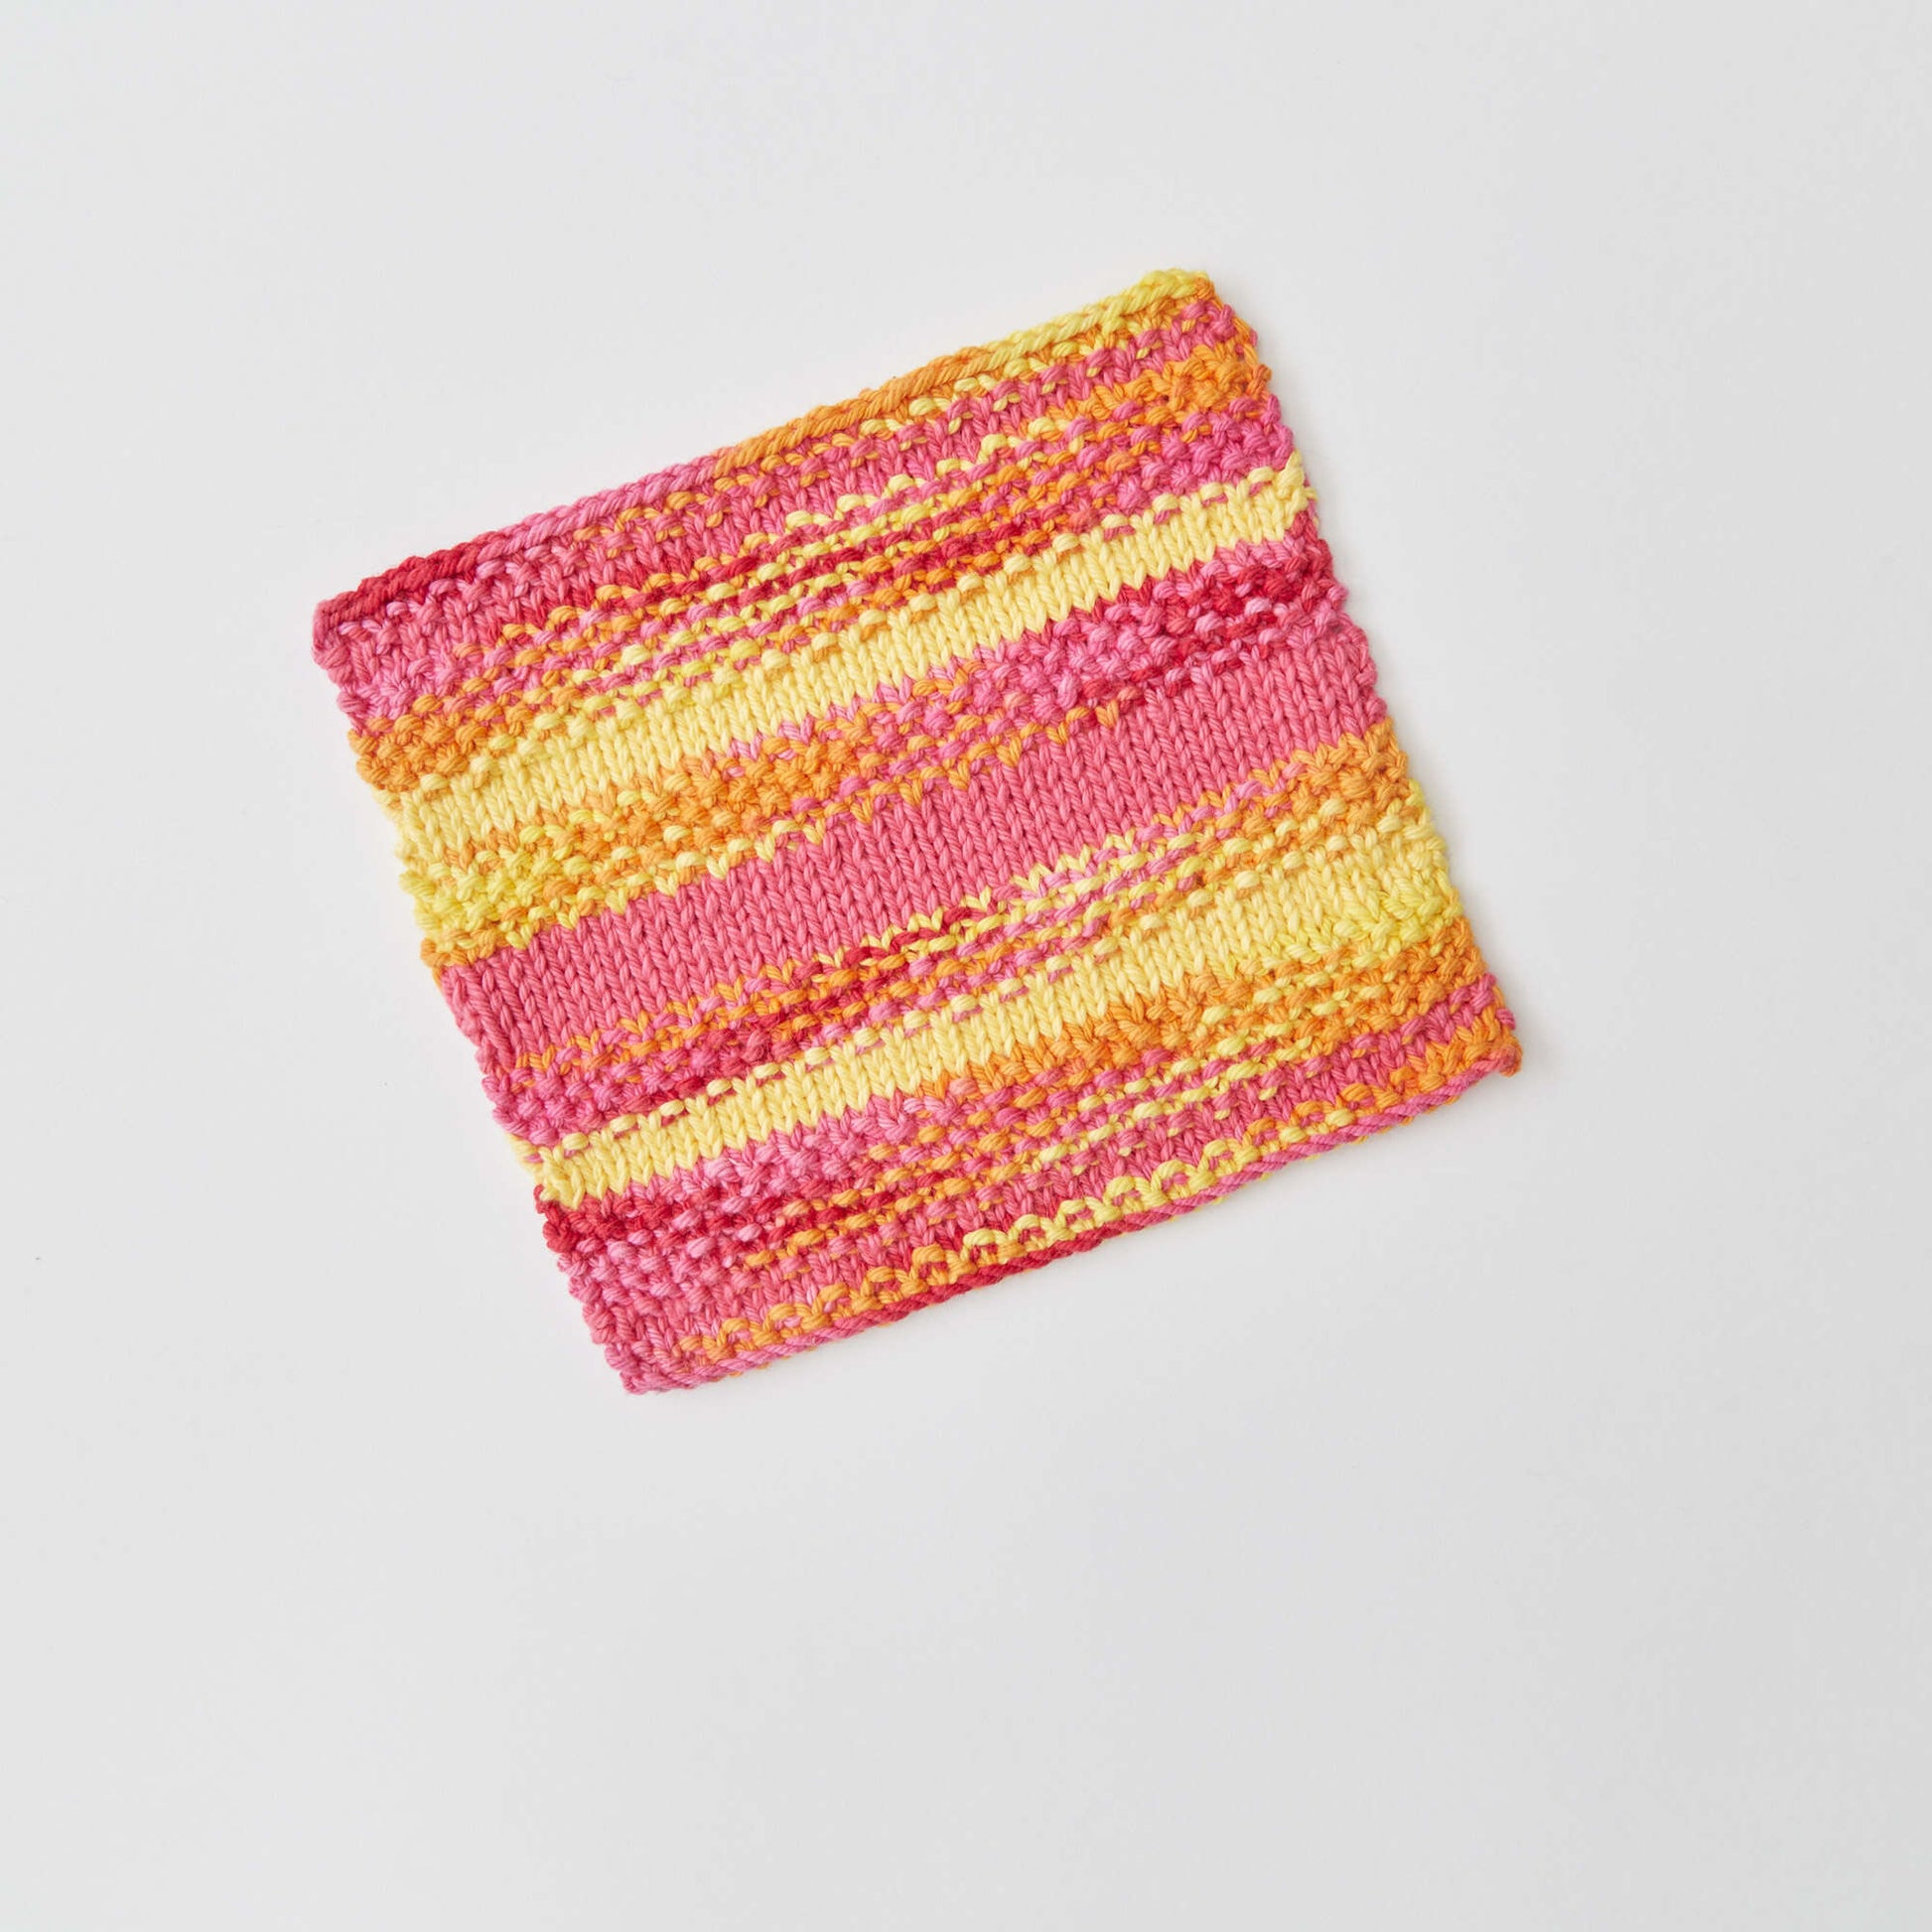 Free Red Heart Knit Textured Stripes Washcloth Pattern